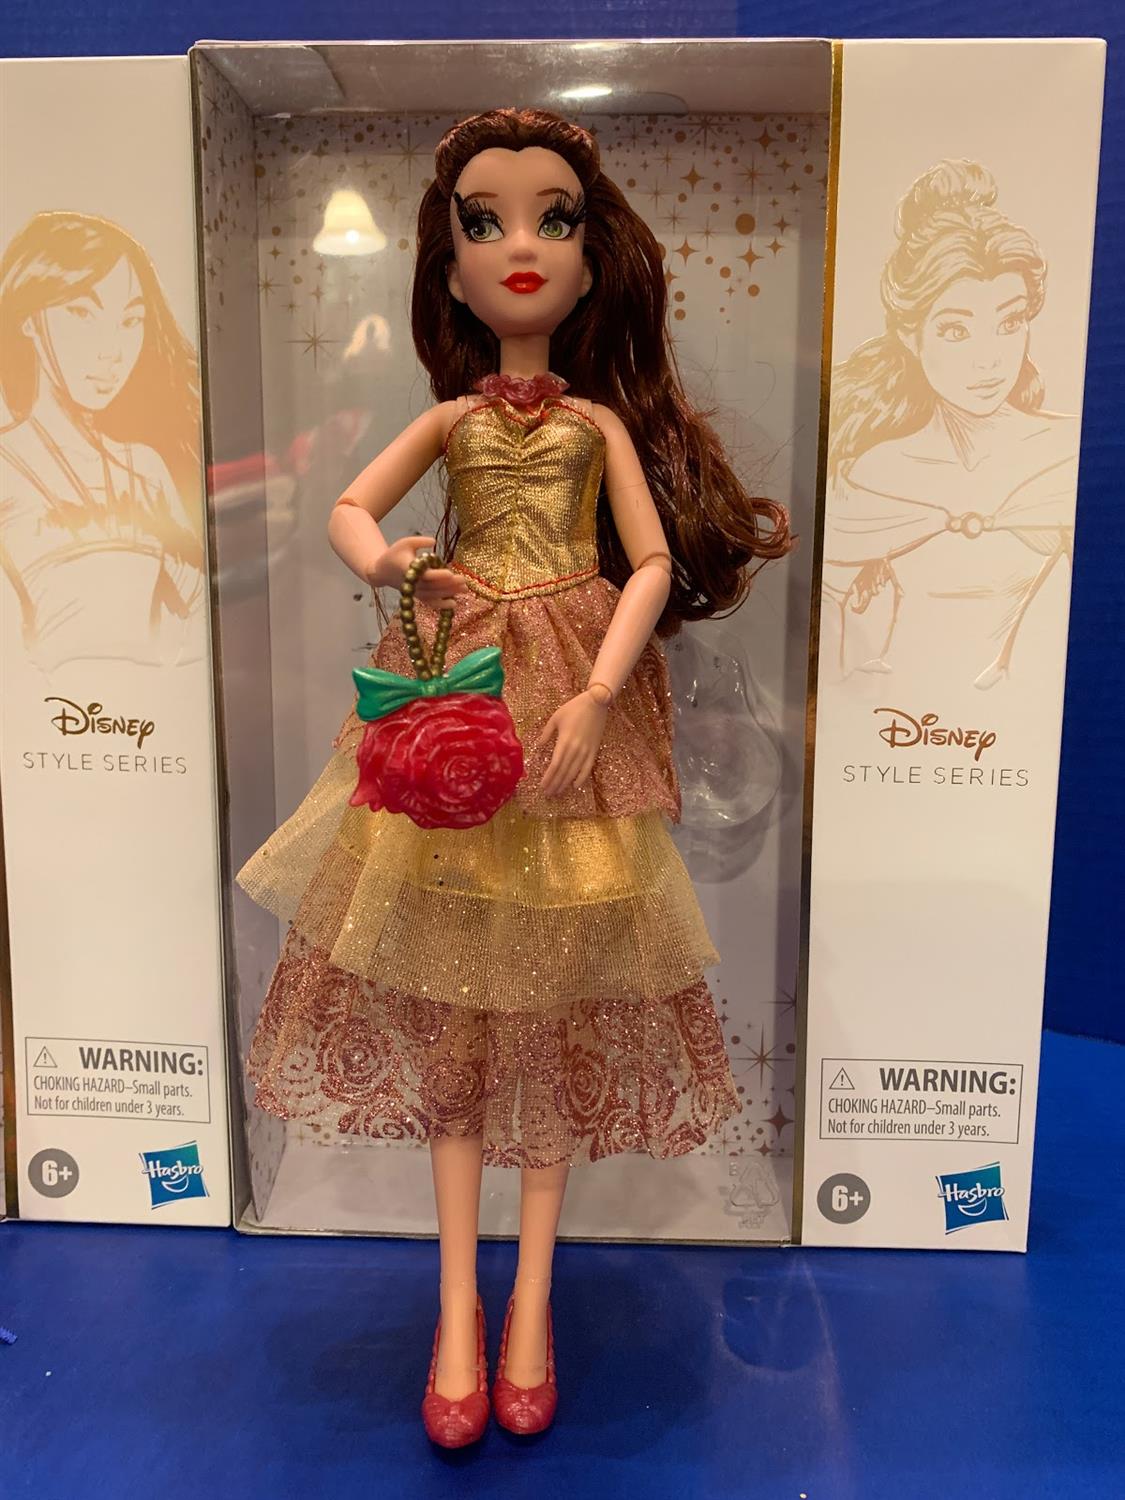 Doll Review Disney Style Series by Hasbro